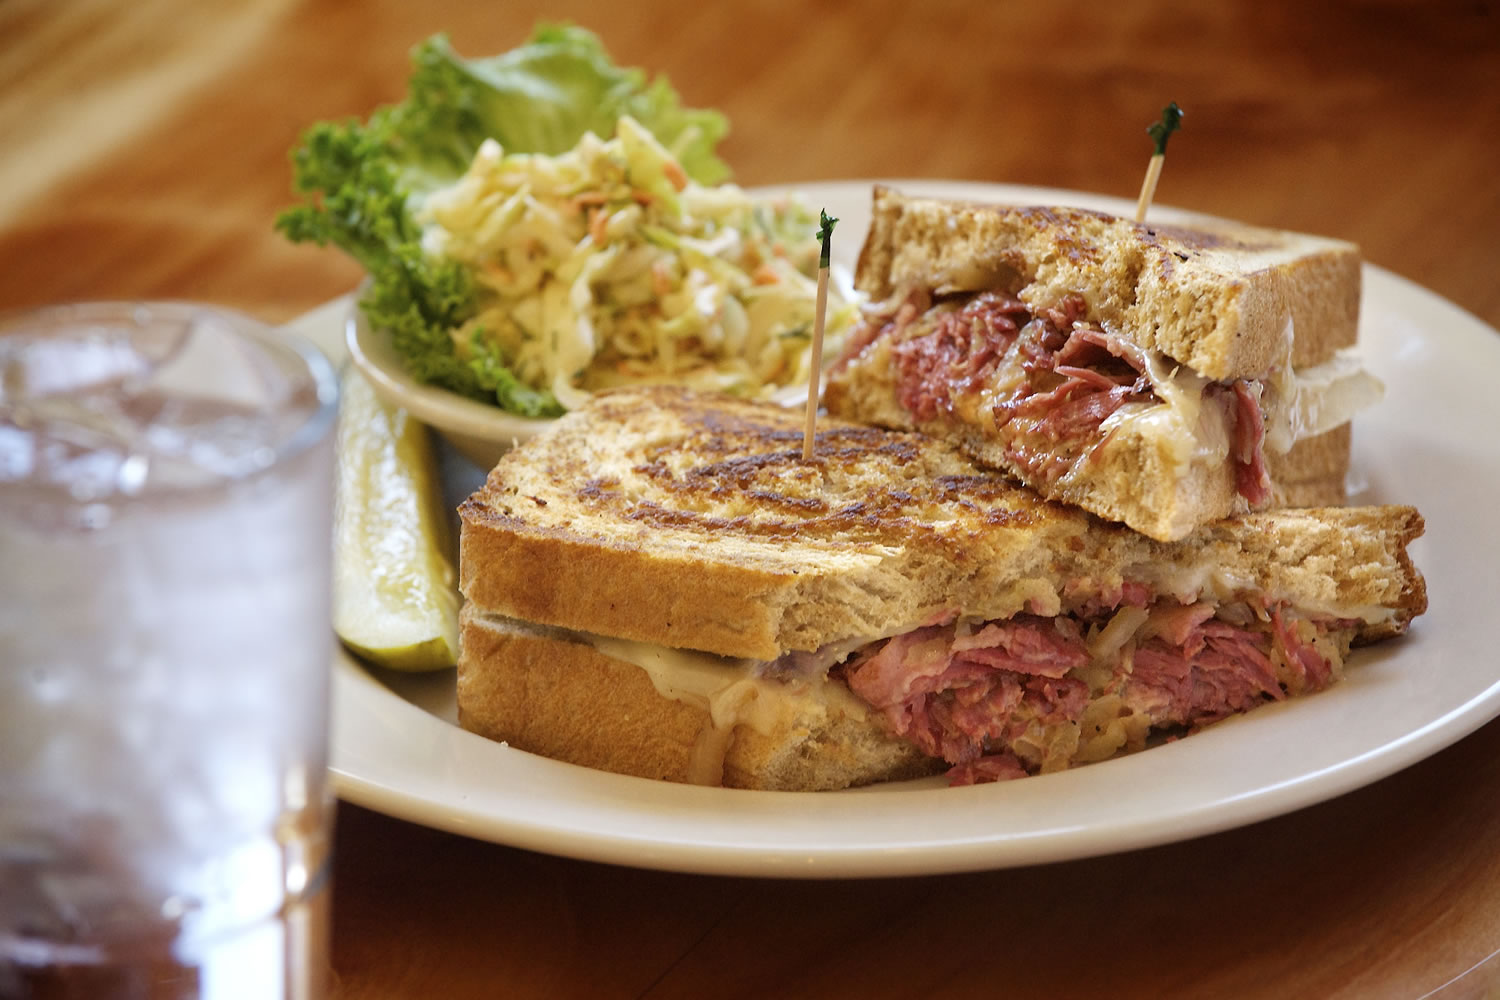 The Reuben sandwich is among the menu items at Beacon Rock Pub in Washougal.